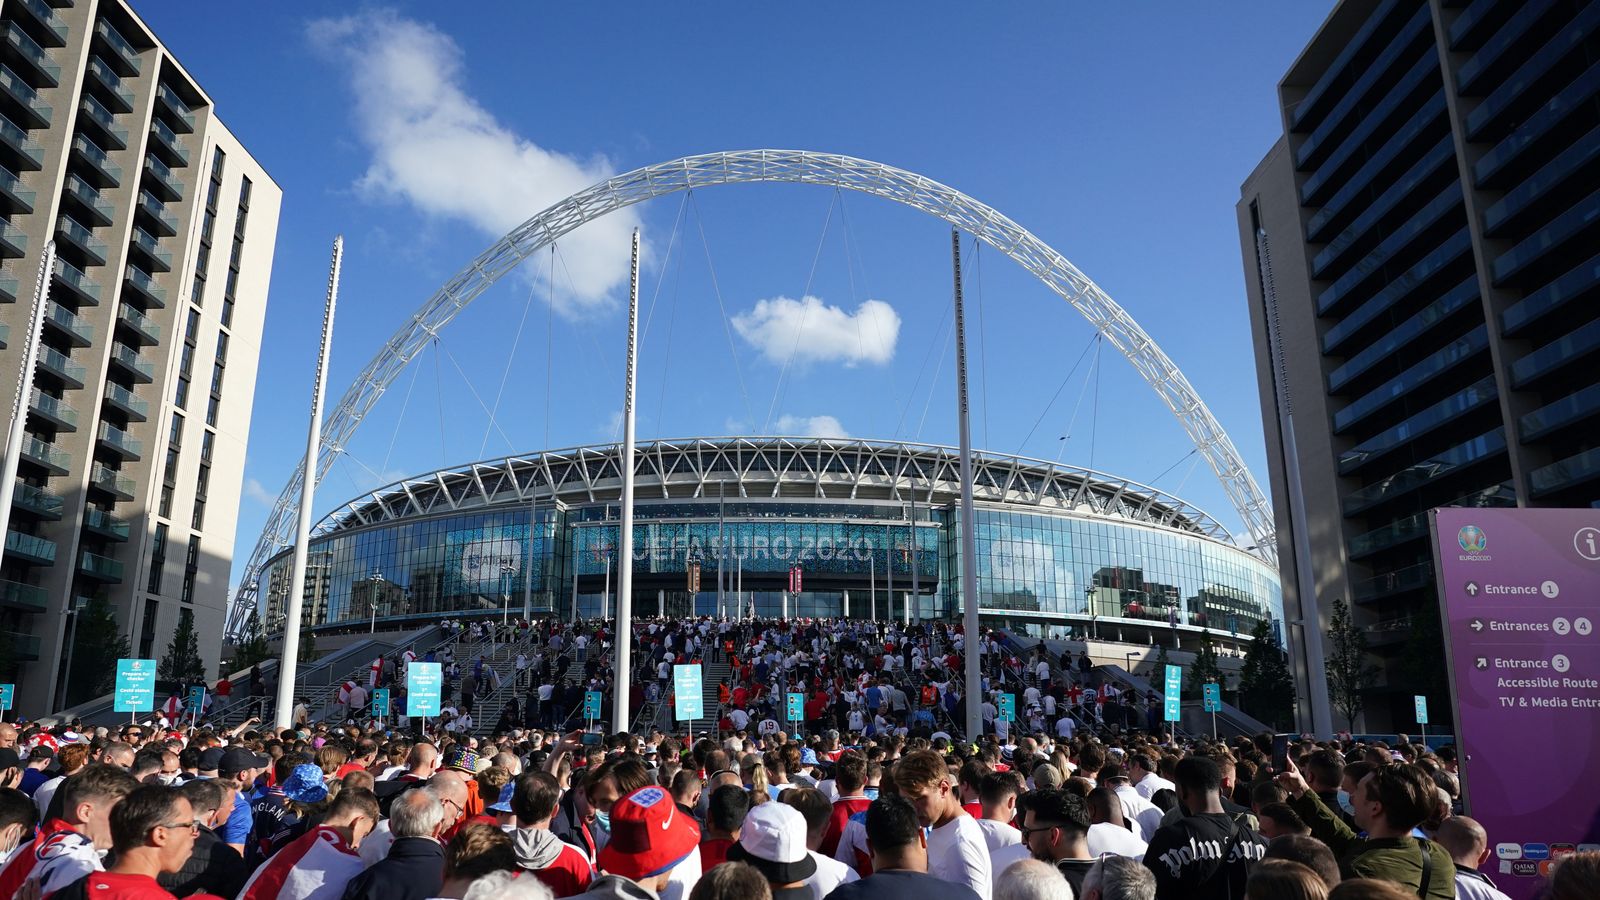 Fans in England surveyed on racism in football after abuse of England players following Euro 2020 final